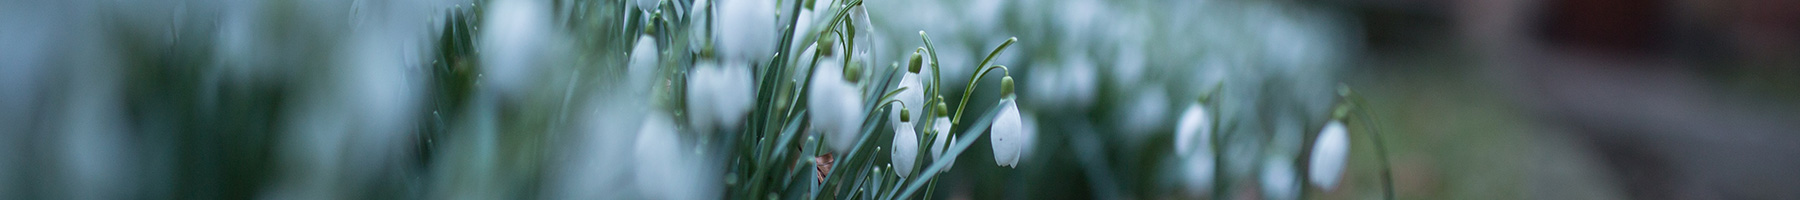 snowdrop flowers by a path